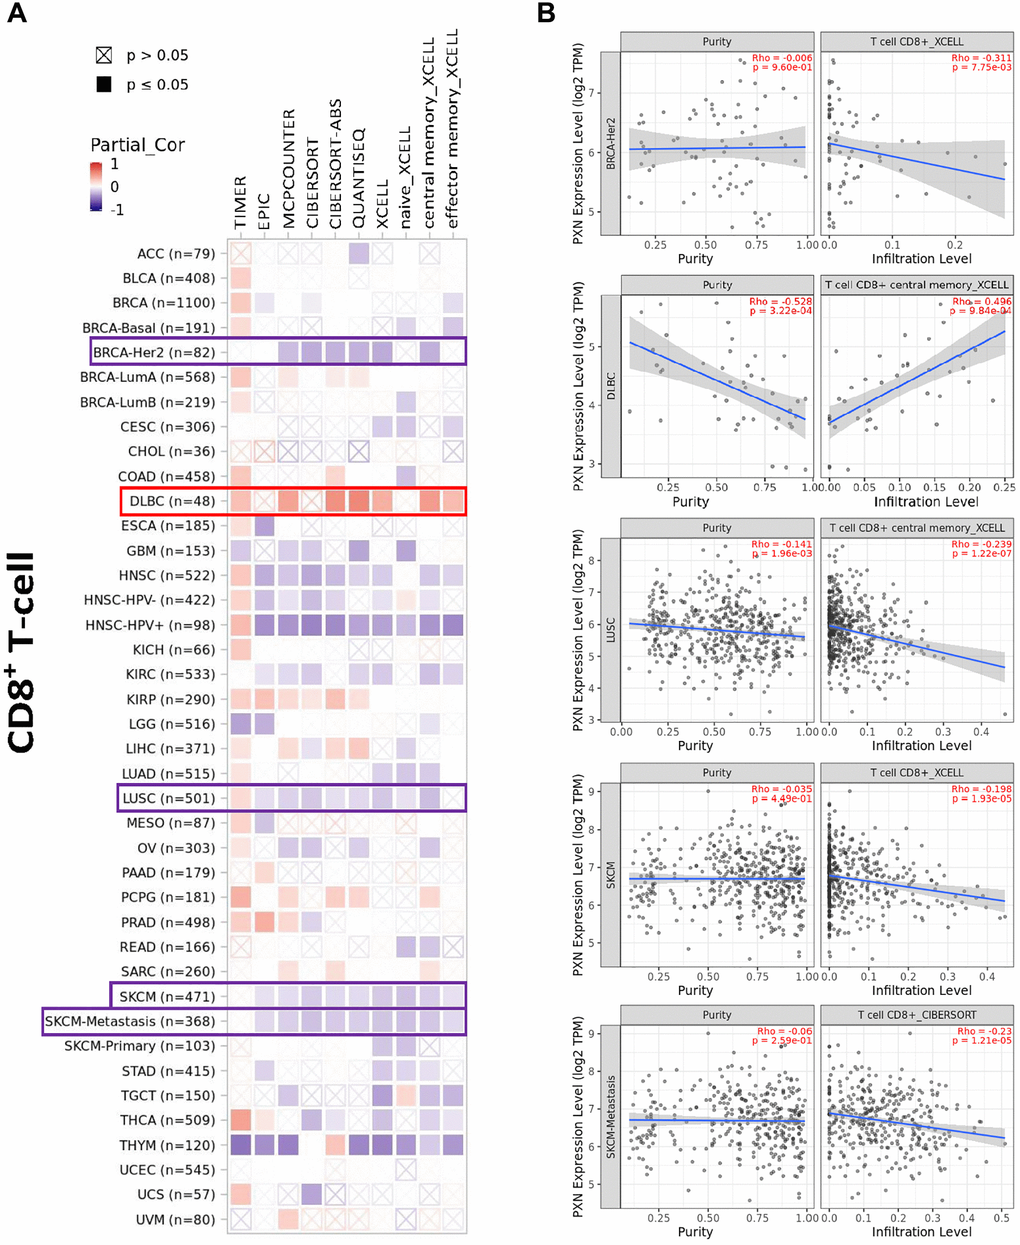 Correlation analysis between PXN gene expression and immune infiltration of CD8+ T cells. Different algorithms explored potential correlations in (A) PXN expression level and (B) infiltration of CD8+ T cells across all types of cancer in TCGA.